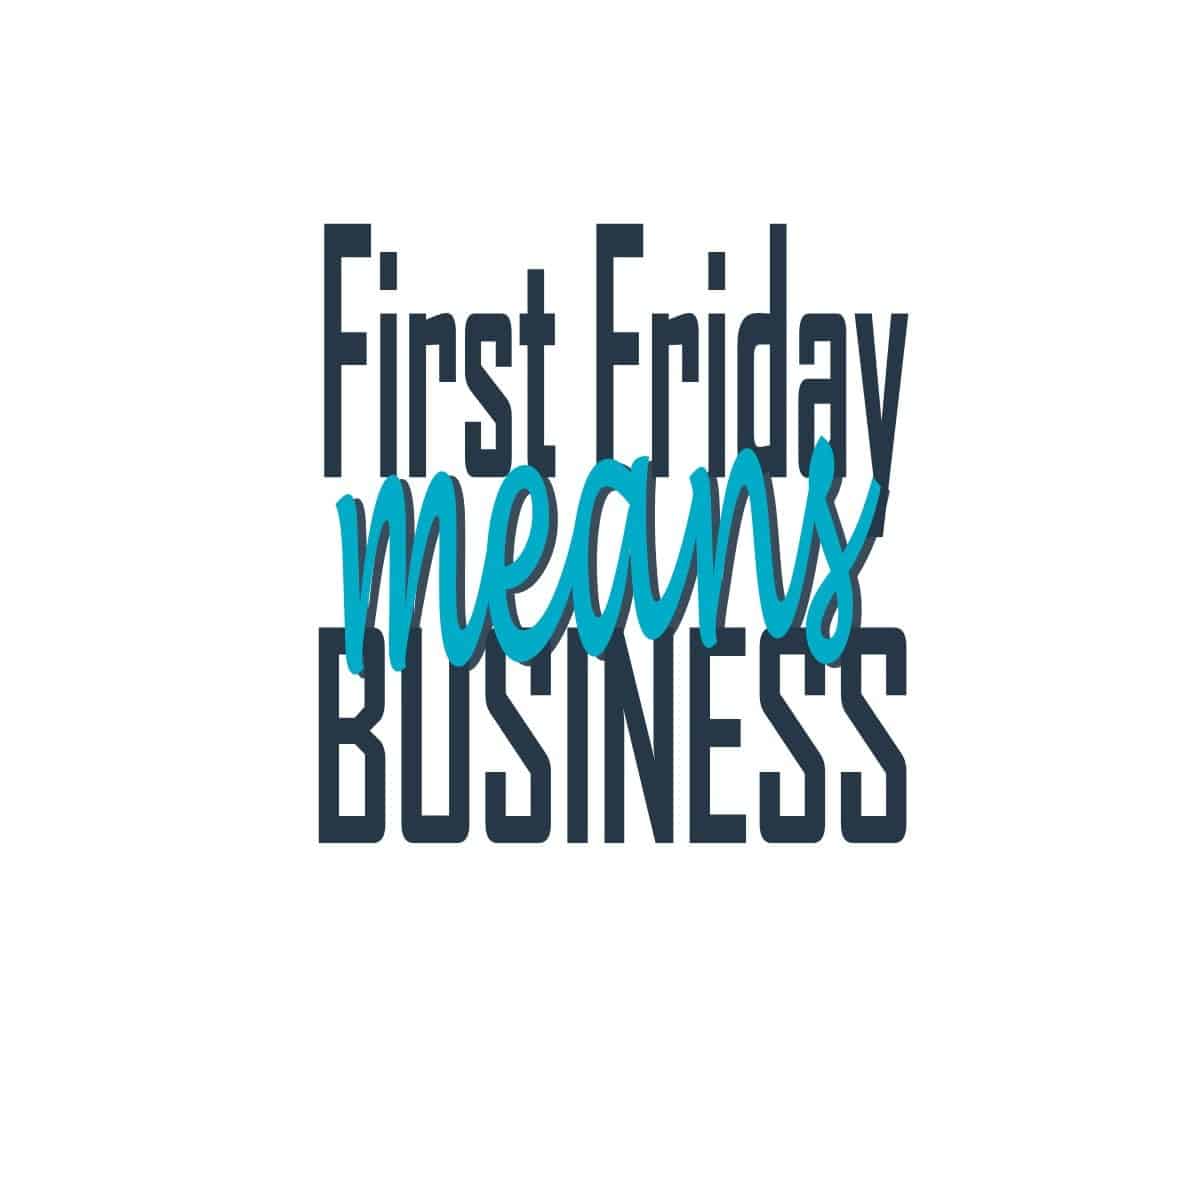 FirstFridayBusiness